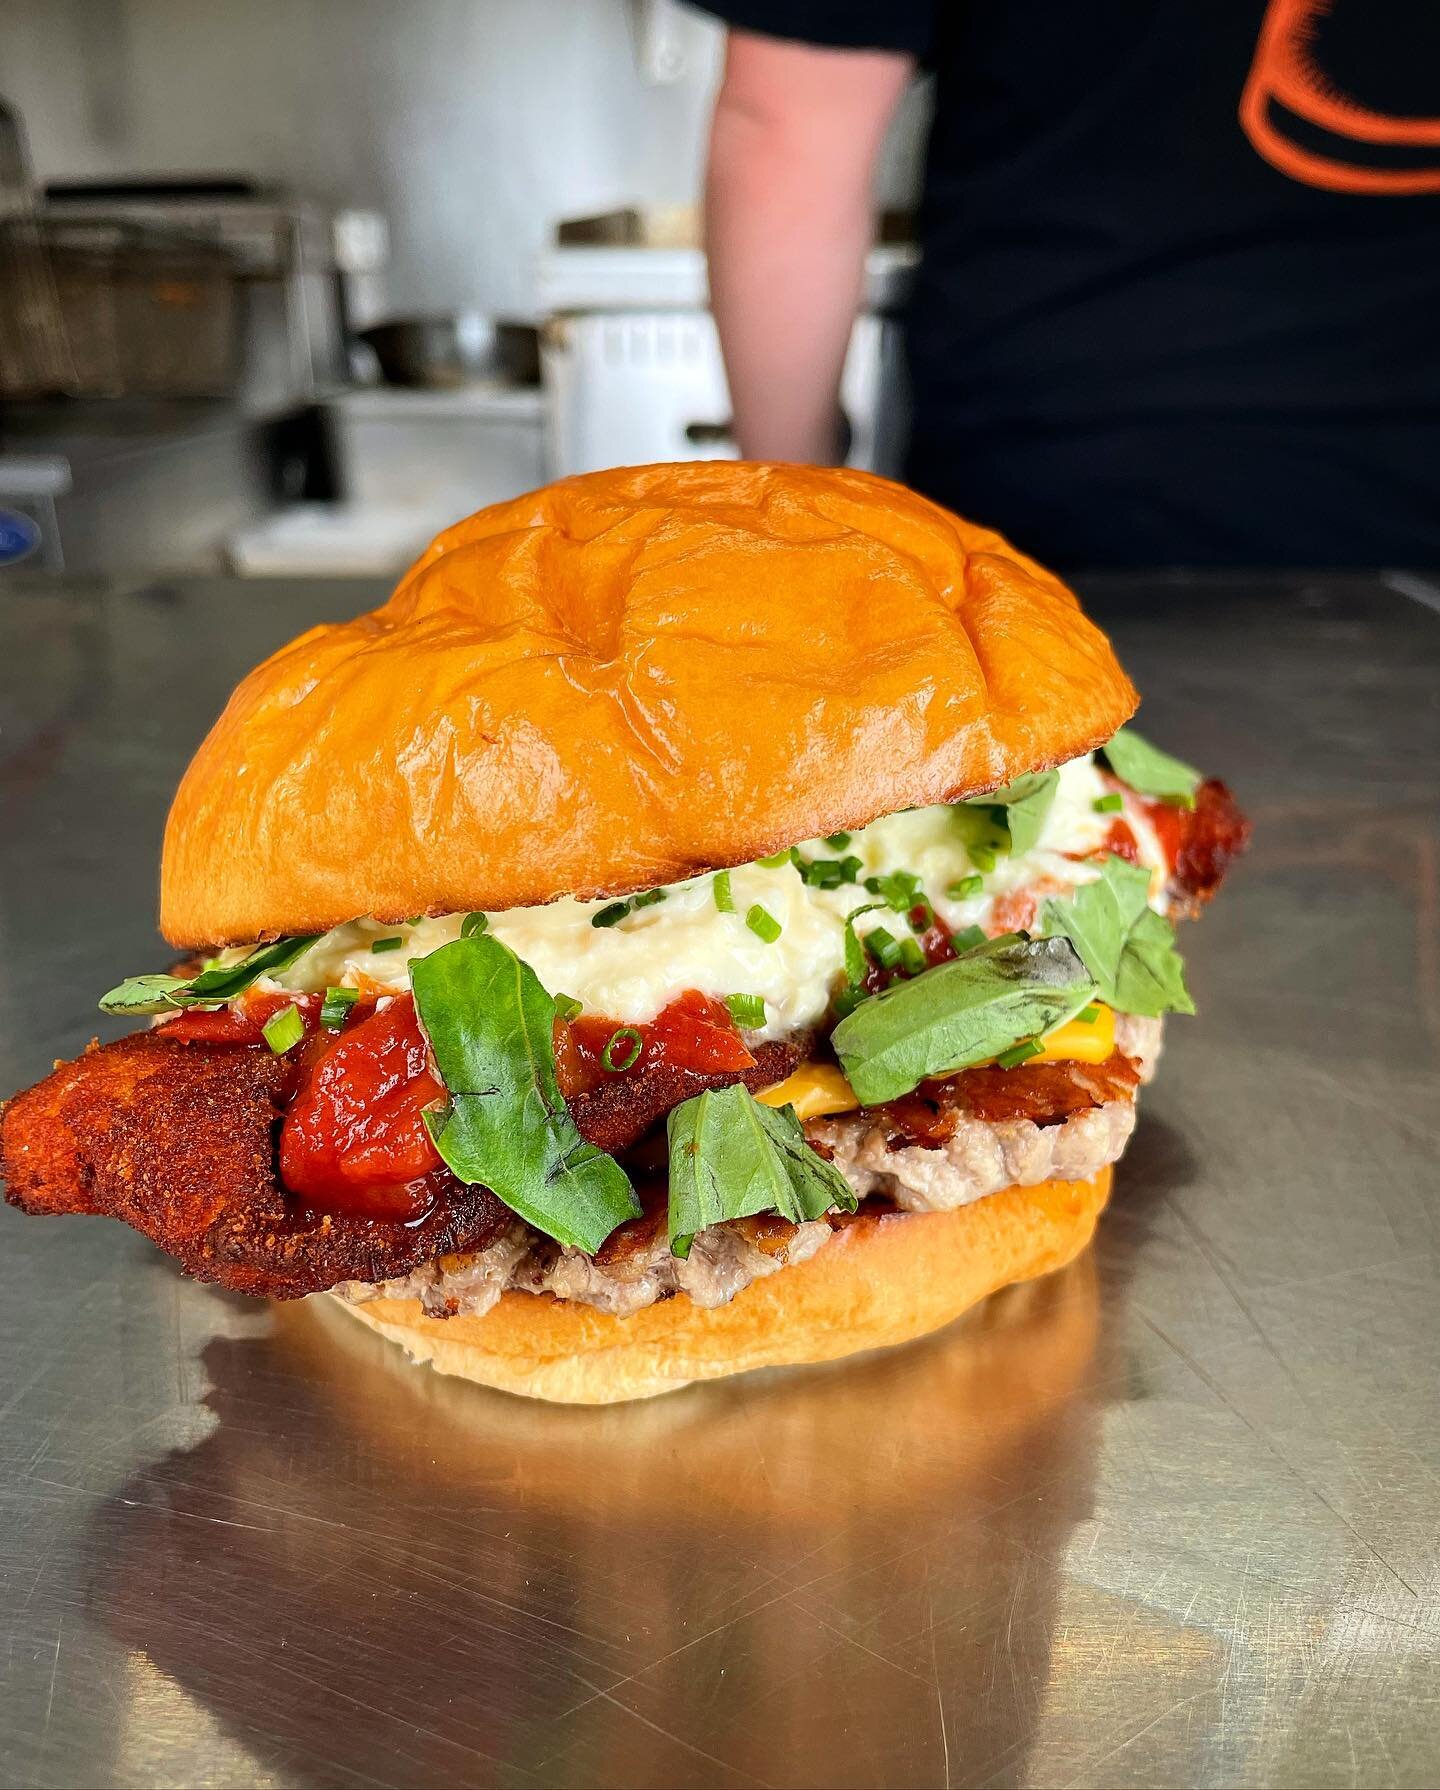 This weekend's speak easy burger is sure to keep you warm even if life's pretty schnitty right now! The Parmadrama burger has a whopping chicken schnitzel, pork patty, Napoli sauce, stracciatella cheese and aioli dressing, all packed between two warm